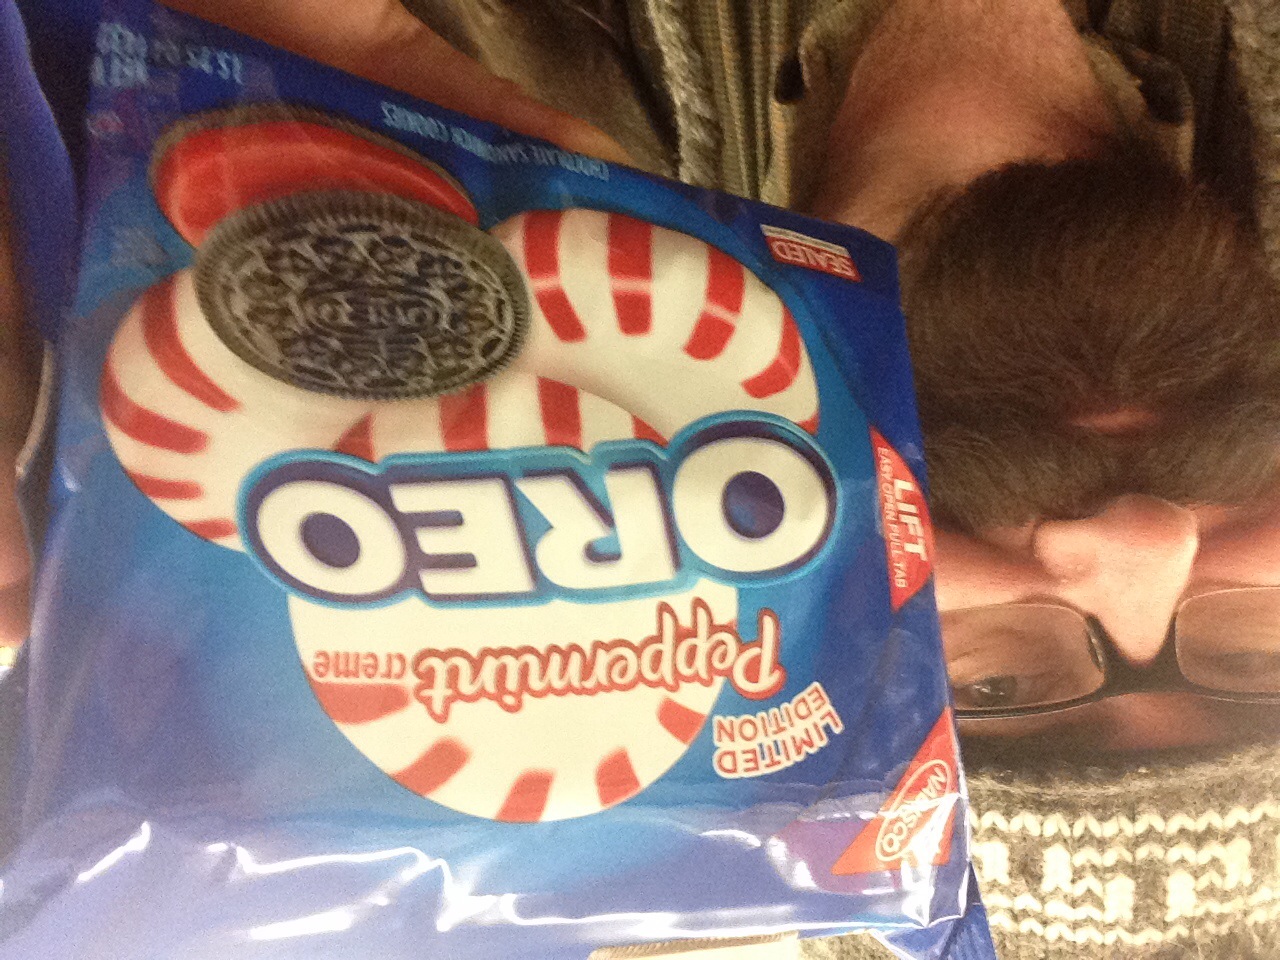 a man holding a bag of oreo cookies in front of his face